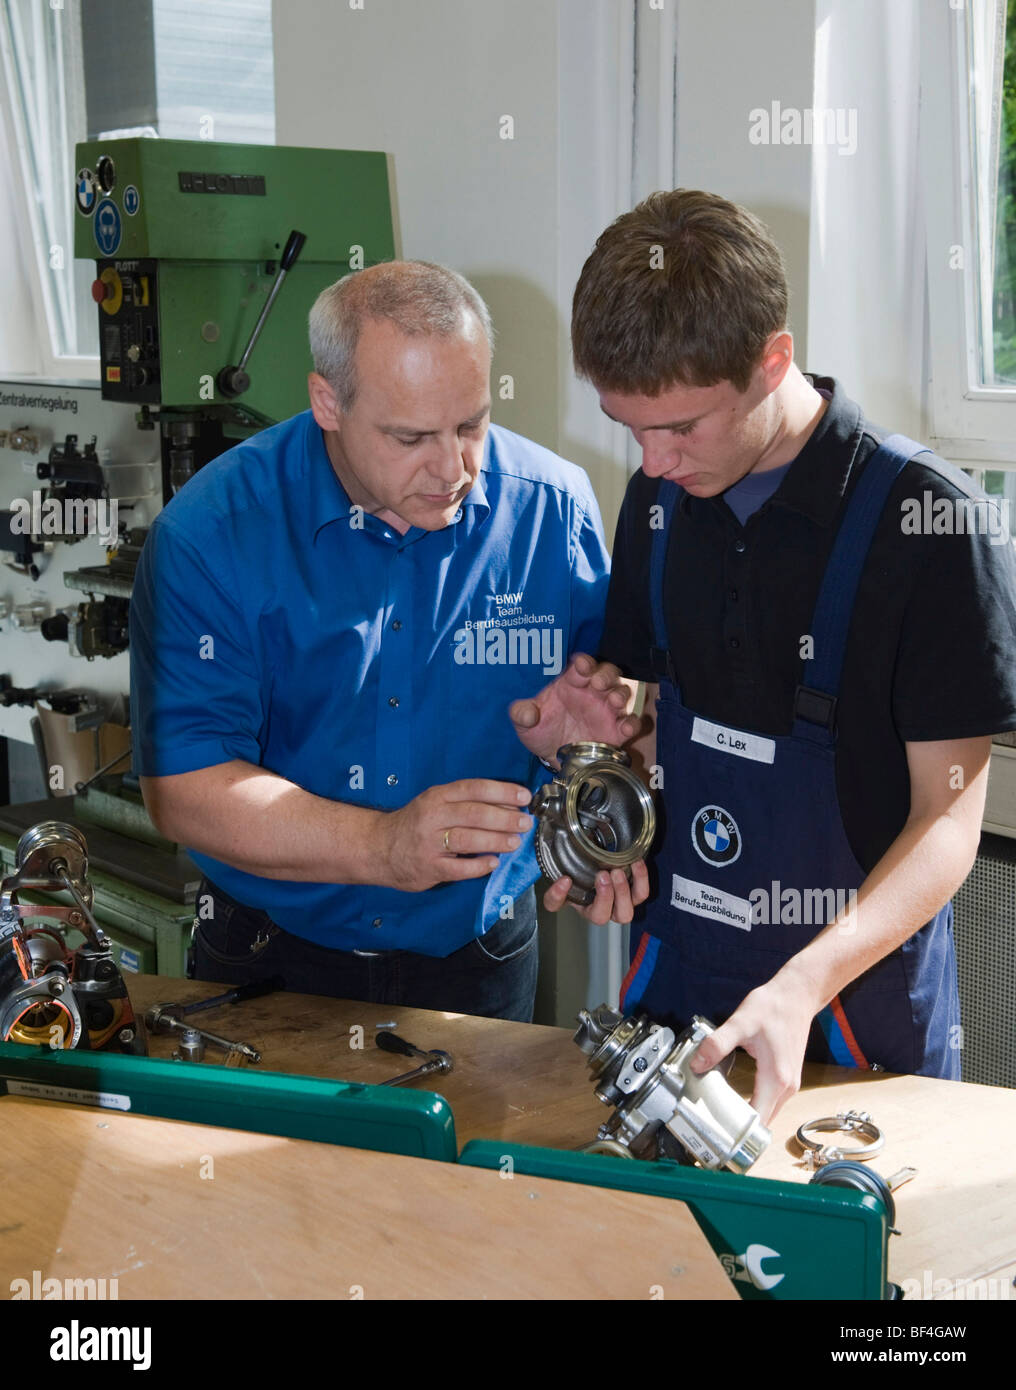 Master explaining to an apprentice while working on part of an engine in the BMW training center for automotive mechatronics, M Stock Photo